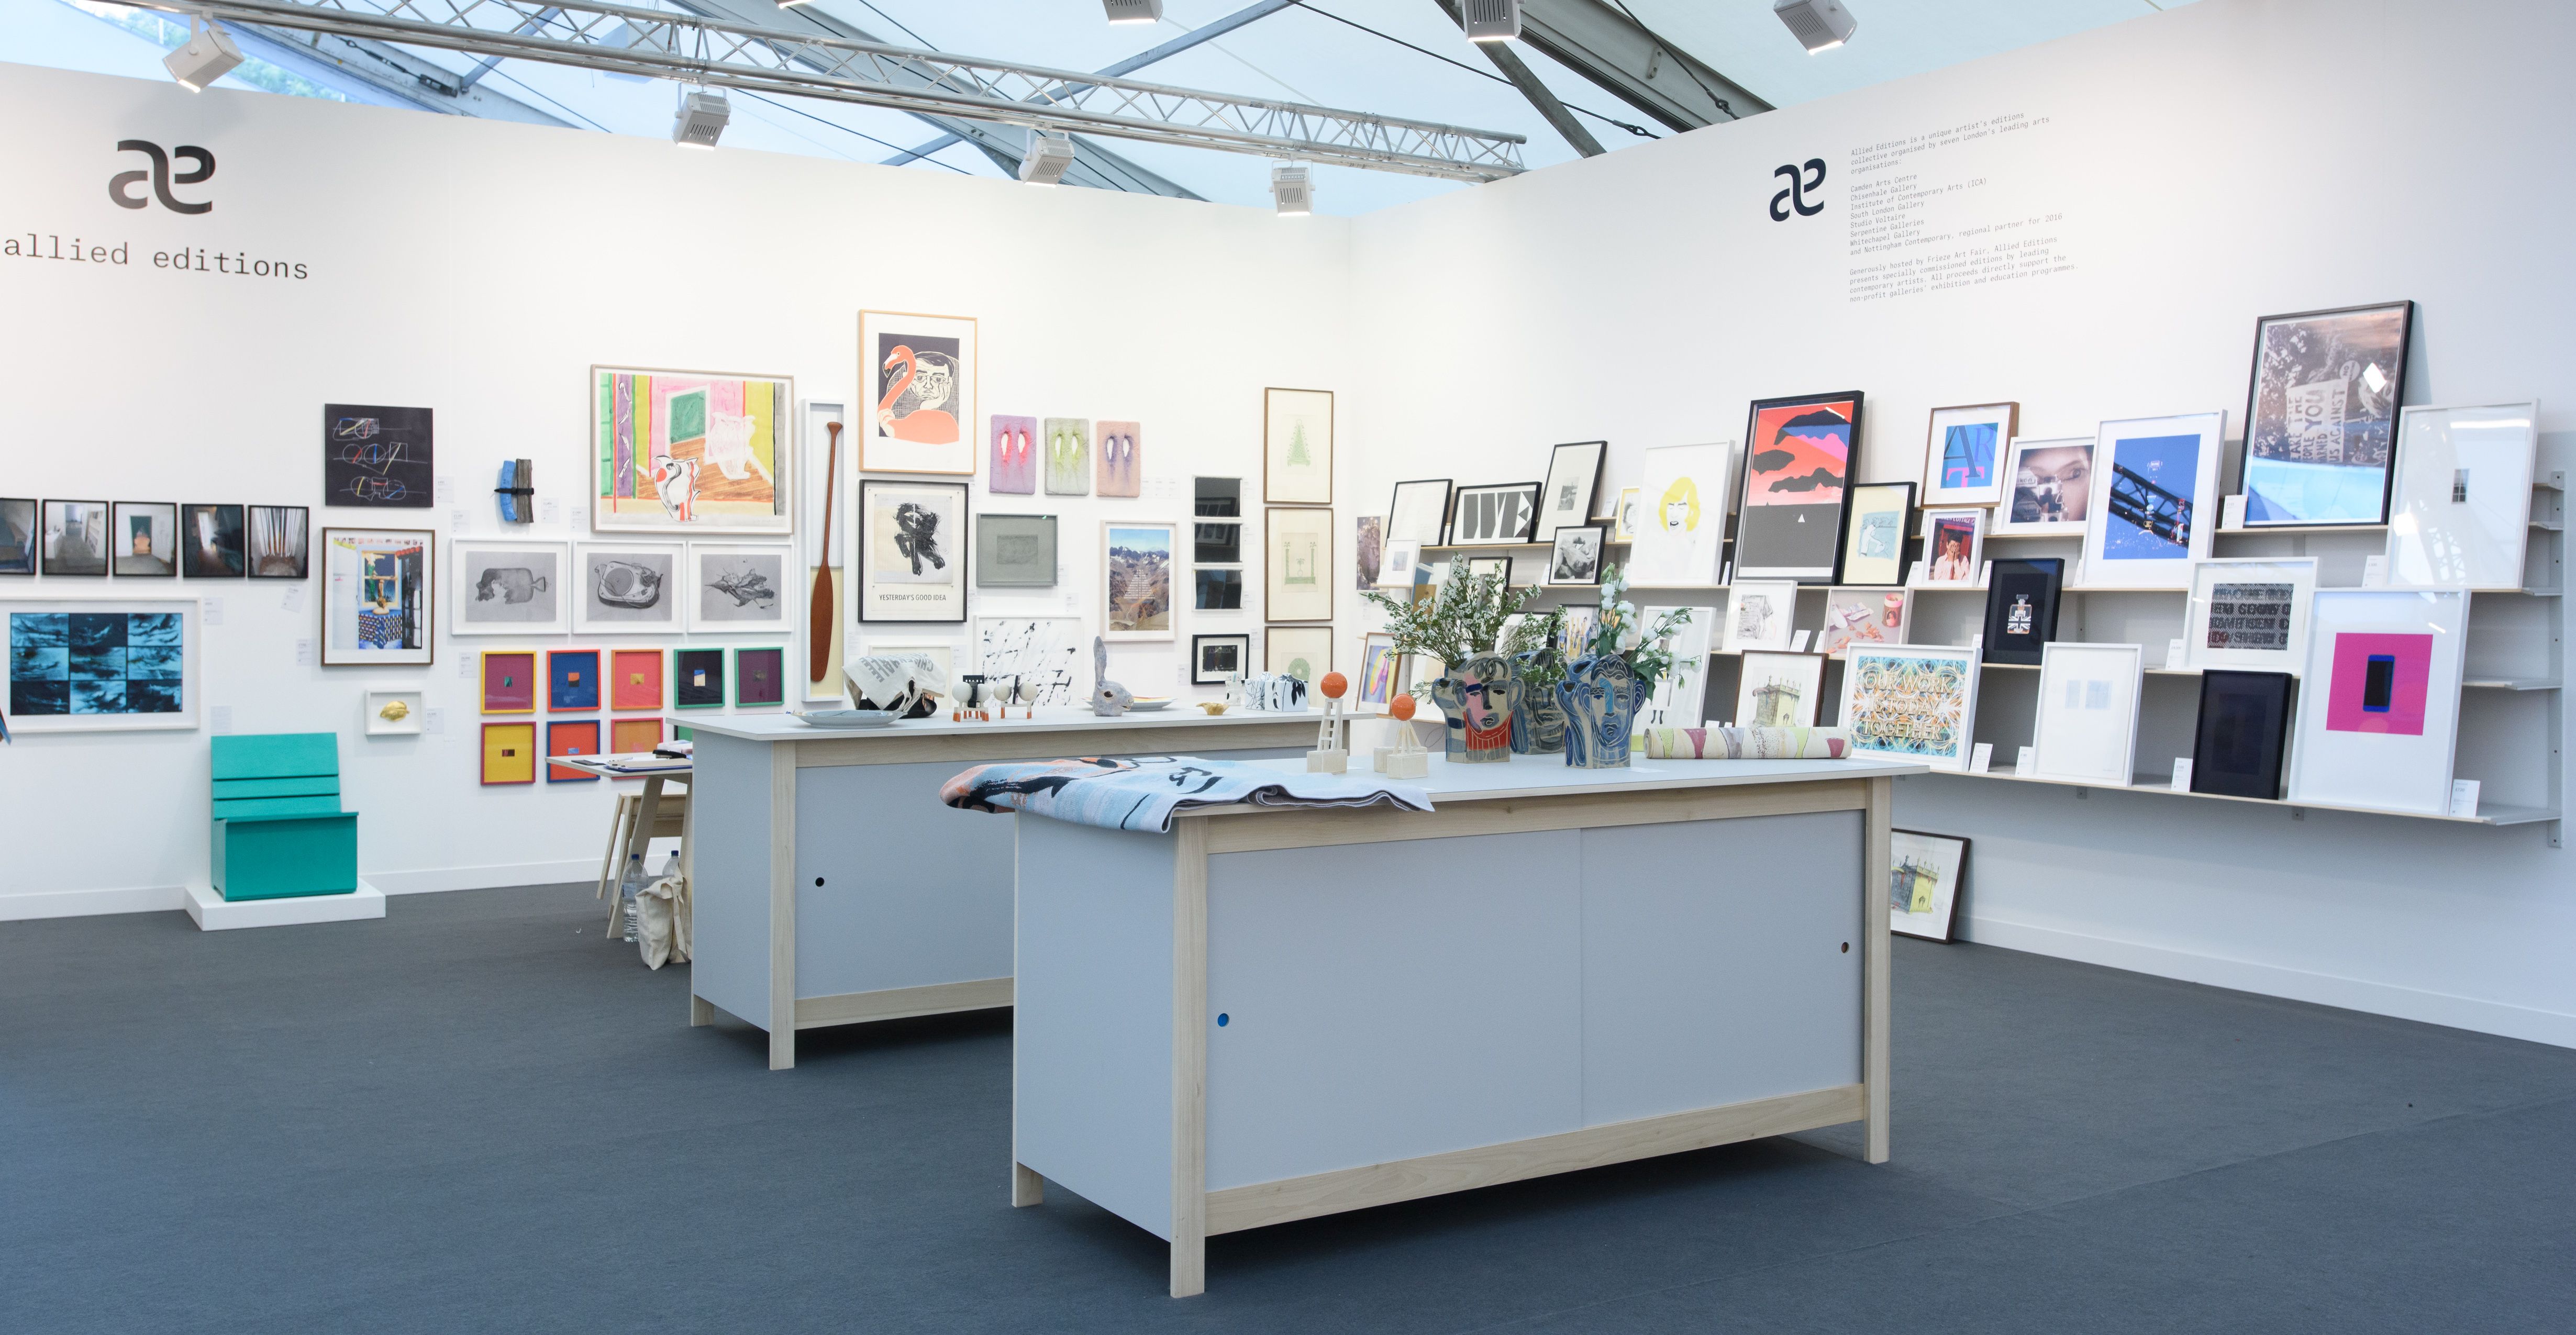 Allied Editions stand at Frieze London 2016 <span class="s1">&copy;&nbsp;Simon Jones</span>